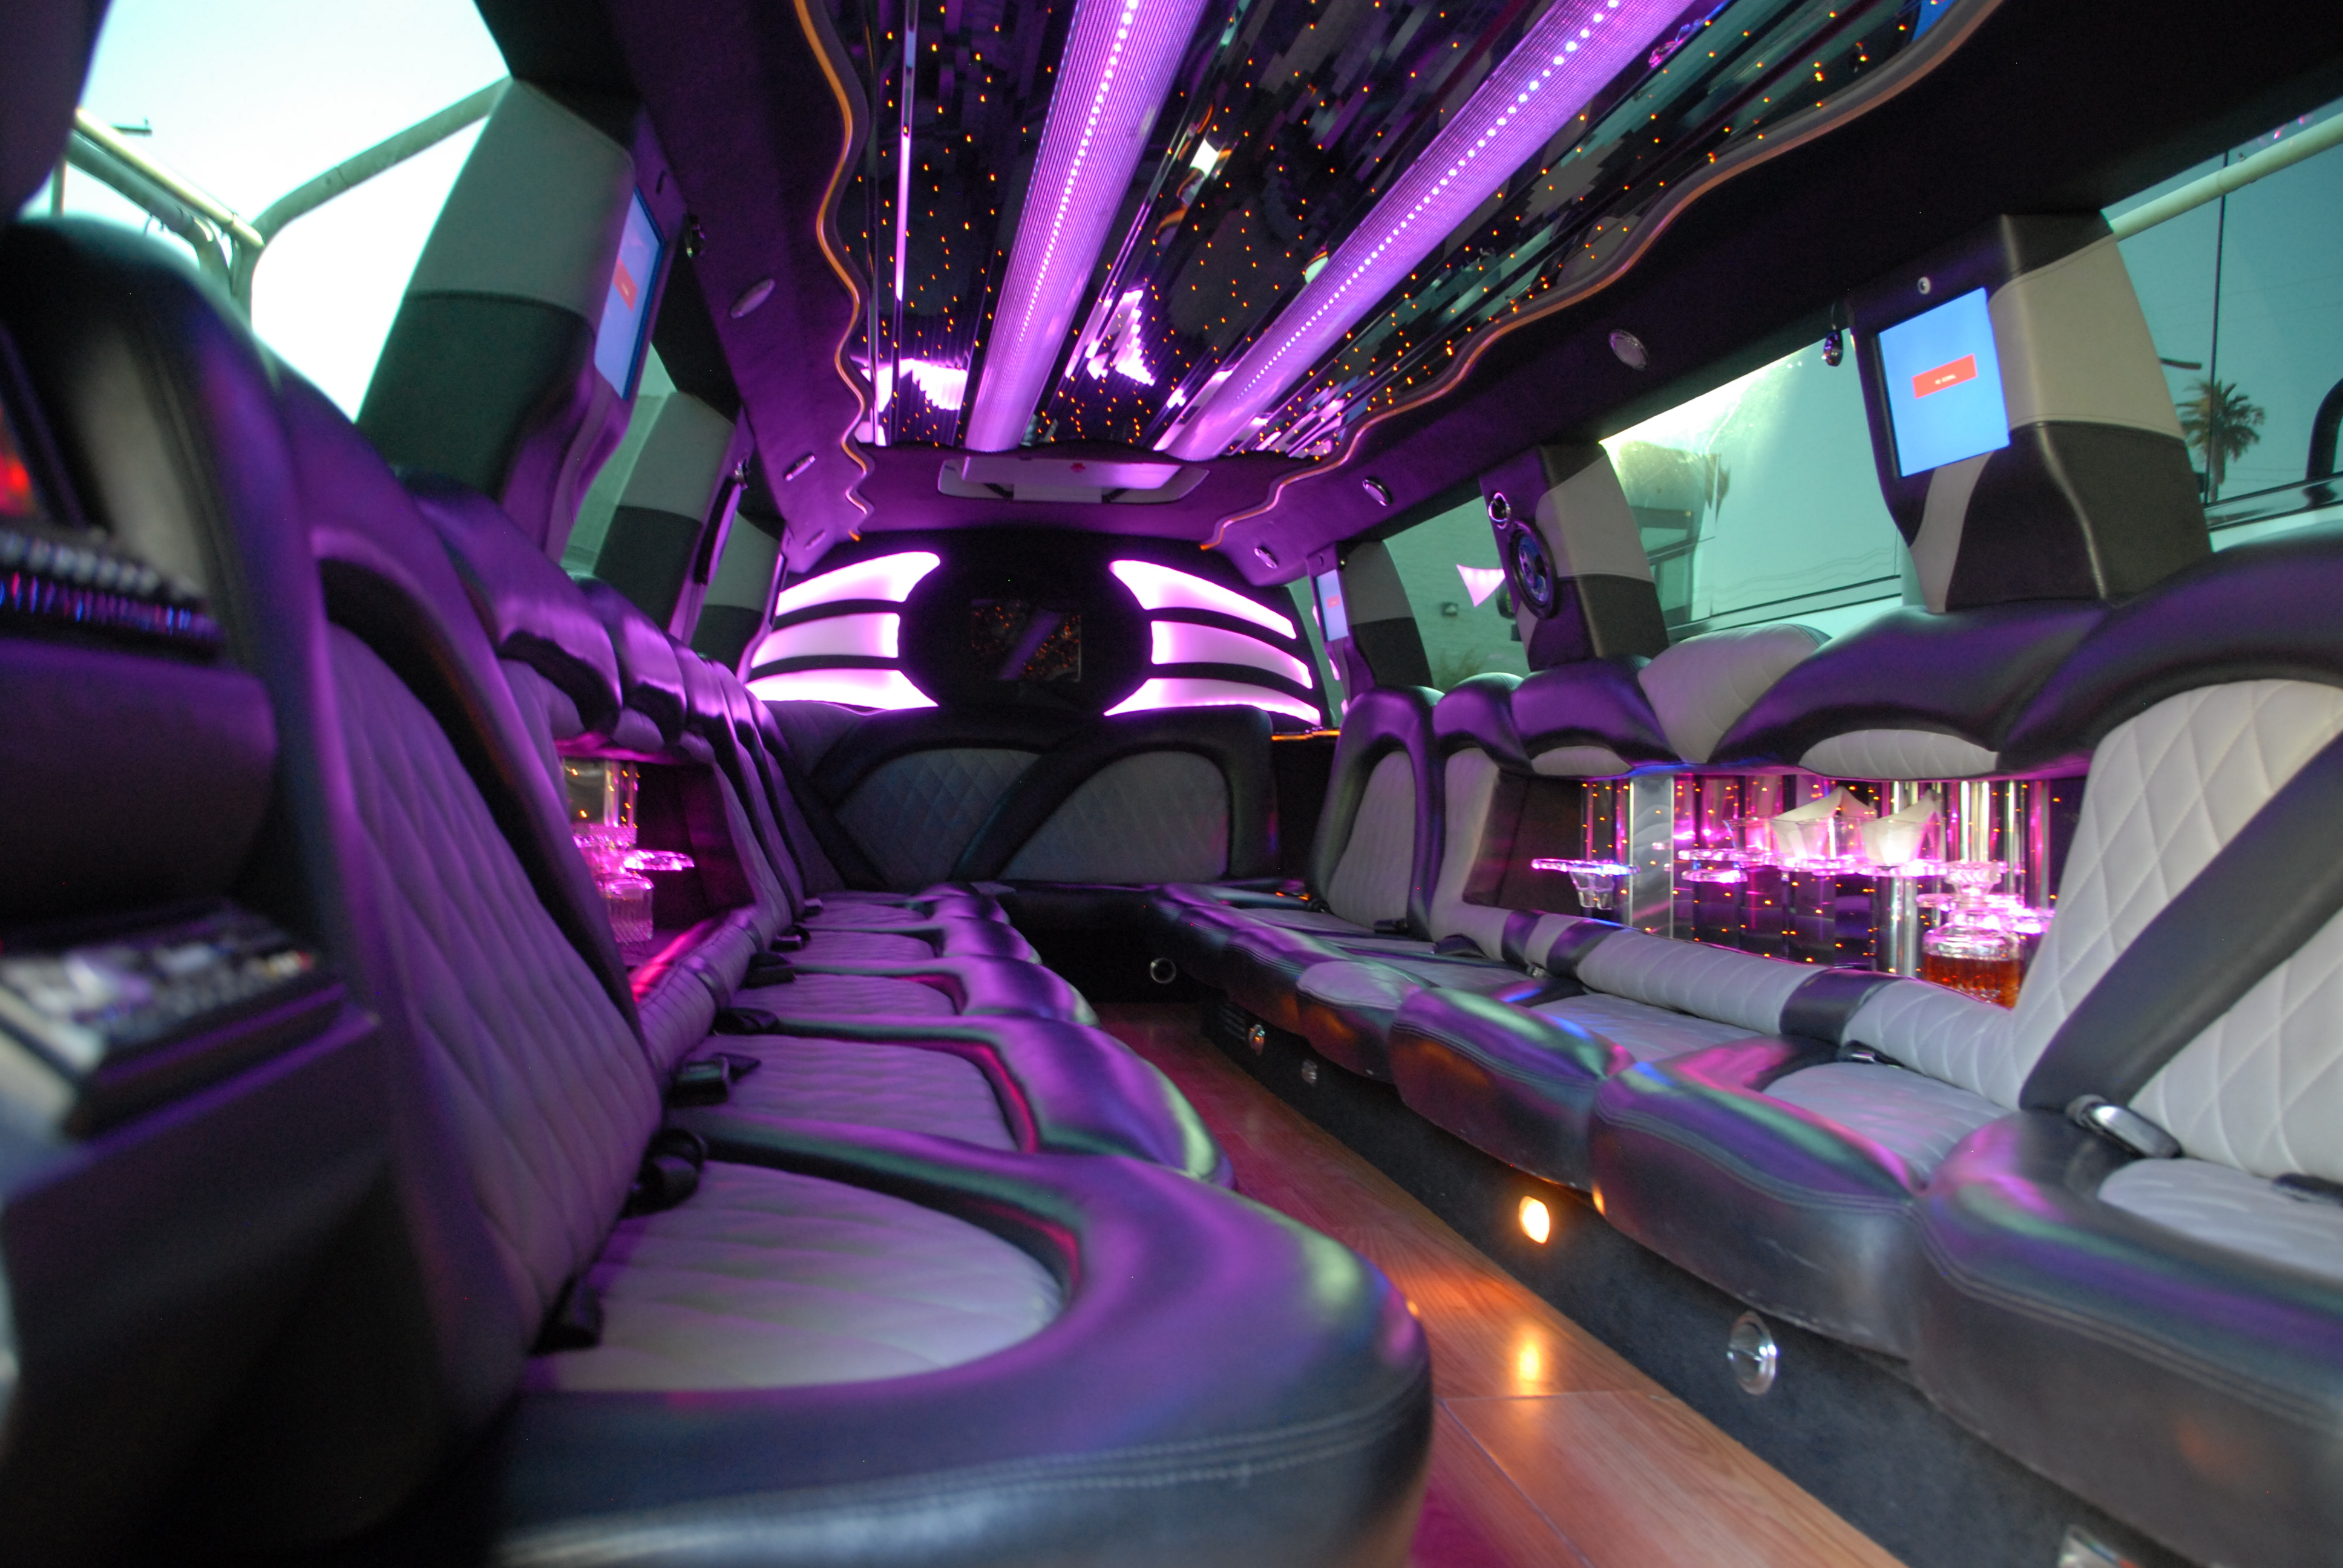 Get more info about miami limo